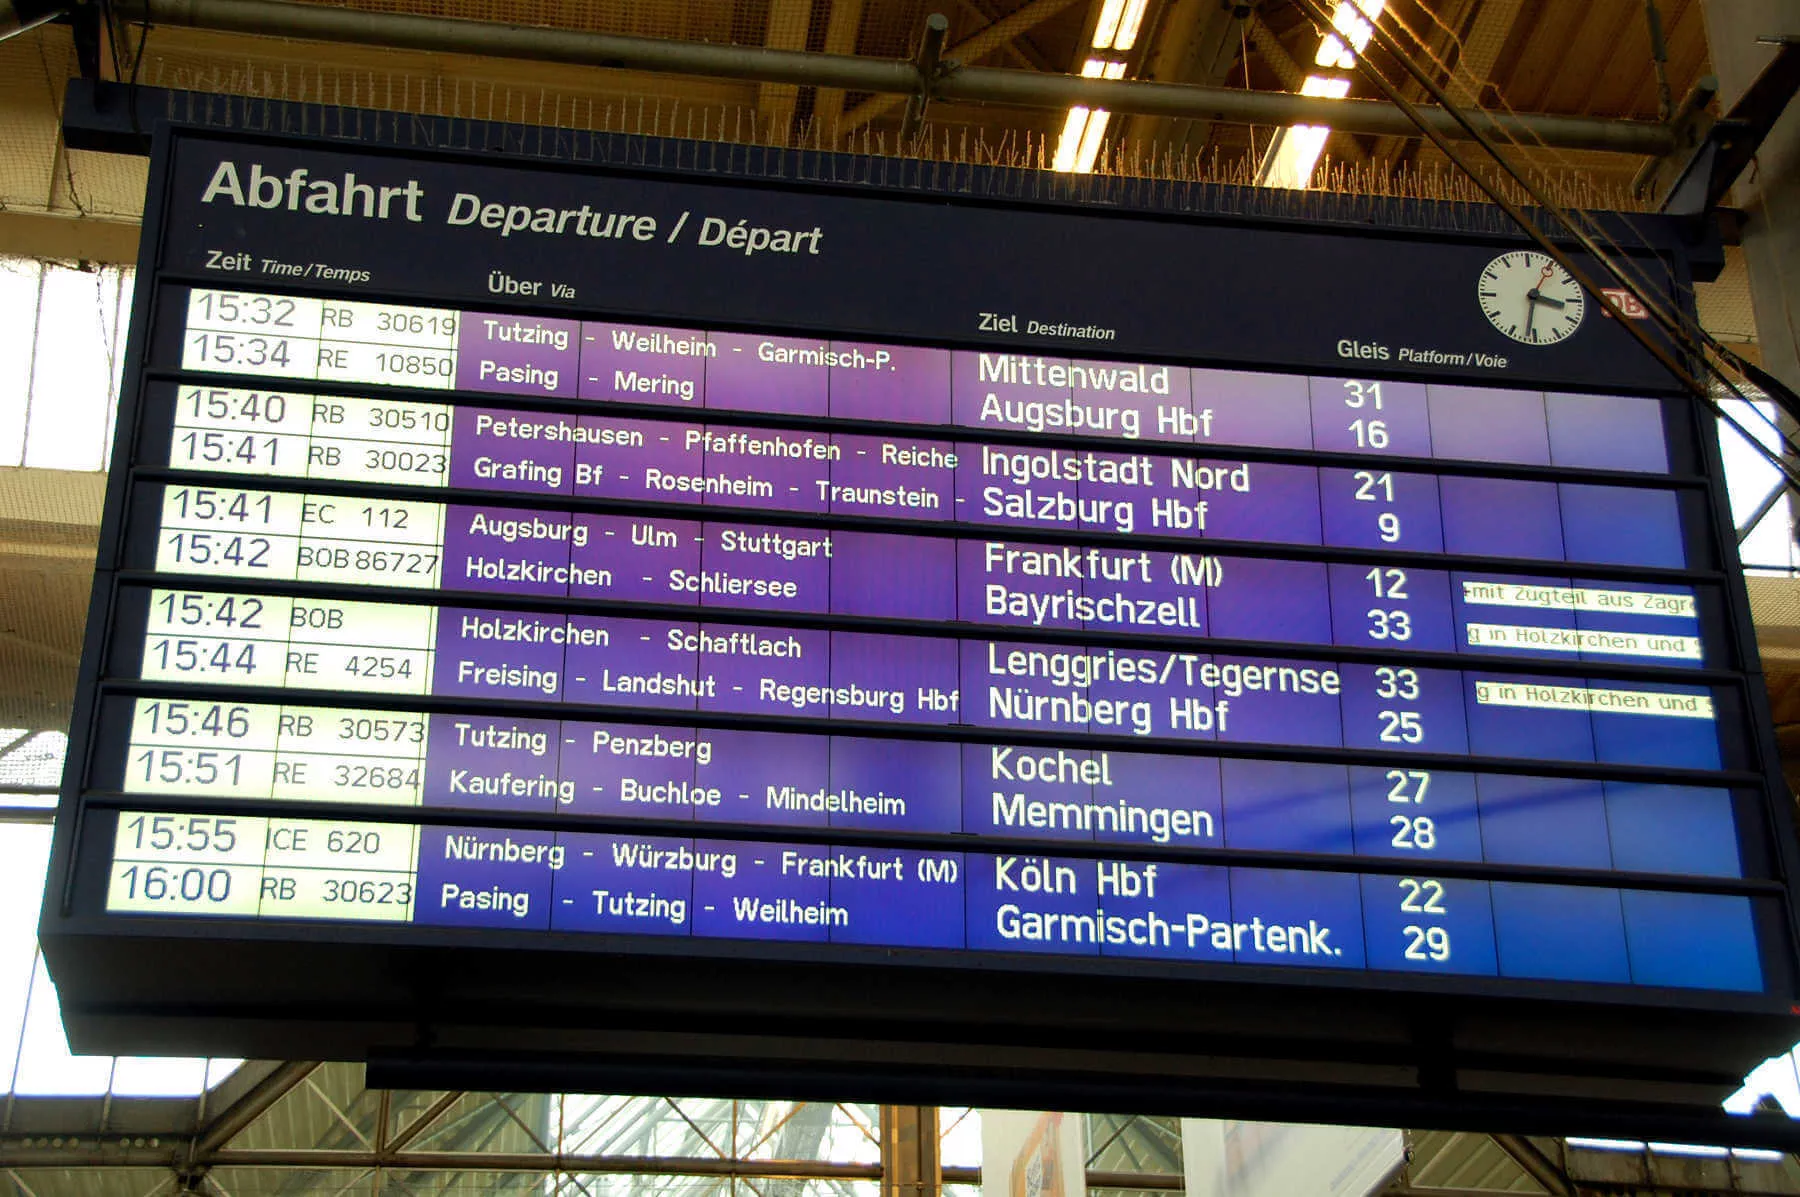 Schedule boards in European train stations have all the information you need to be on your way: departure times, routing, destinations, and track numbers